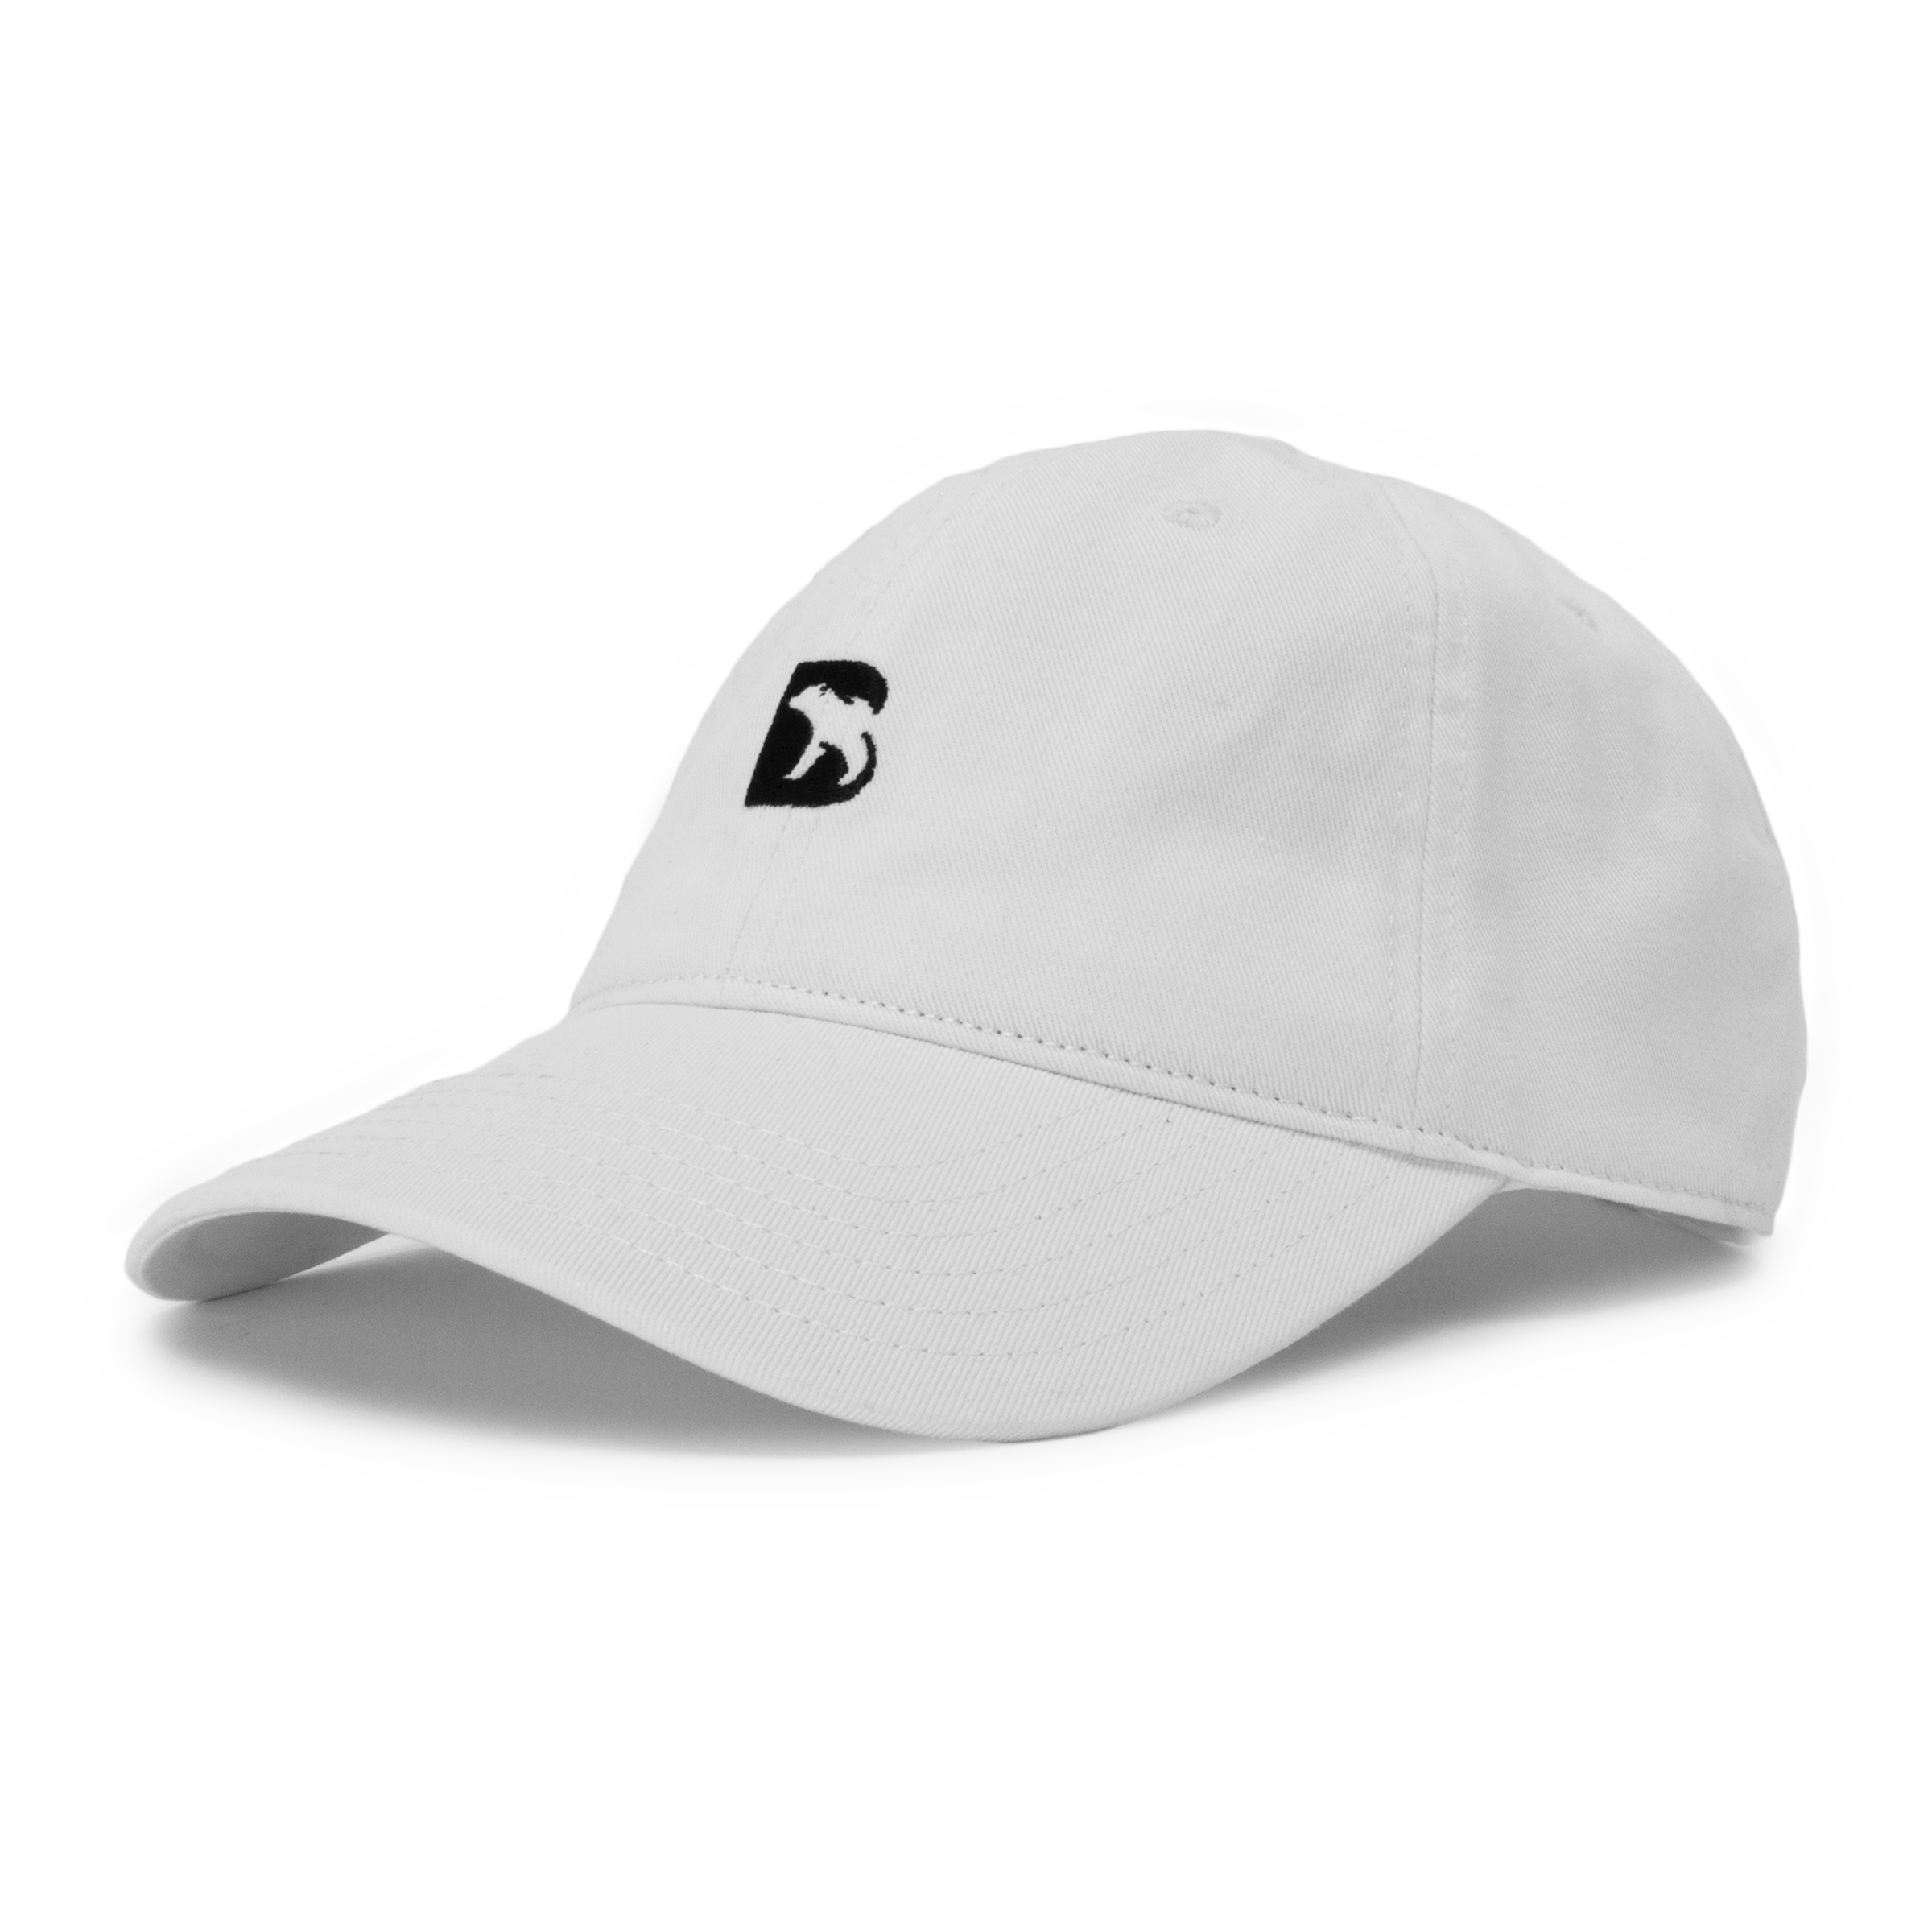 Bearbottom Dad Hat White front left